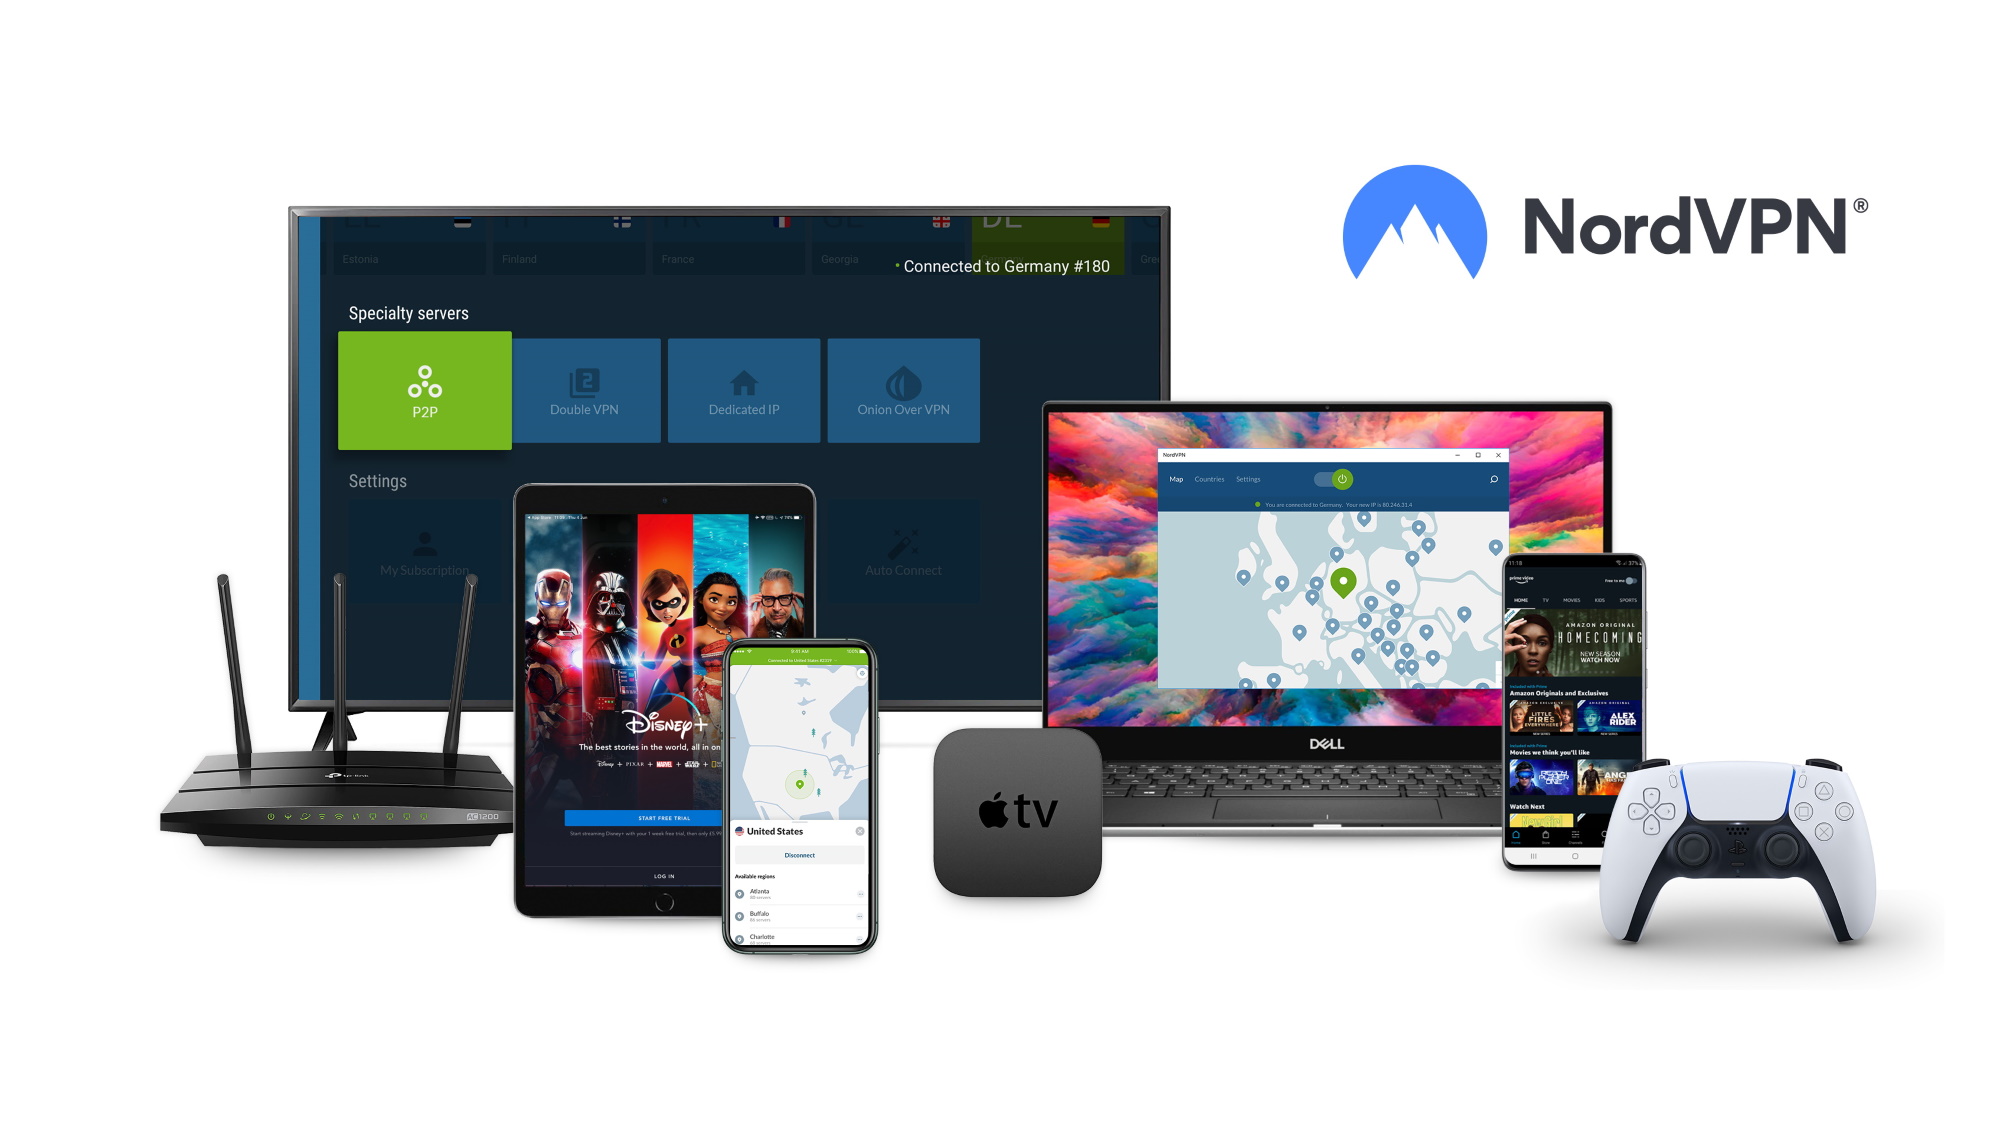 NordVPN running on a desktop, mobile devices, Apple TV, a router and game consoles